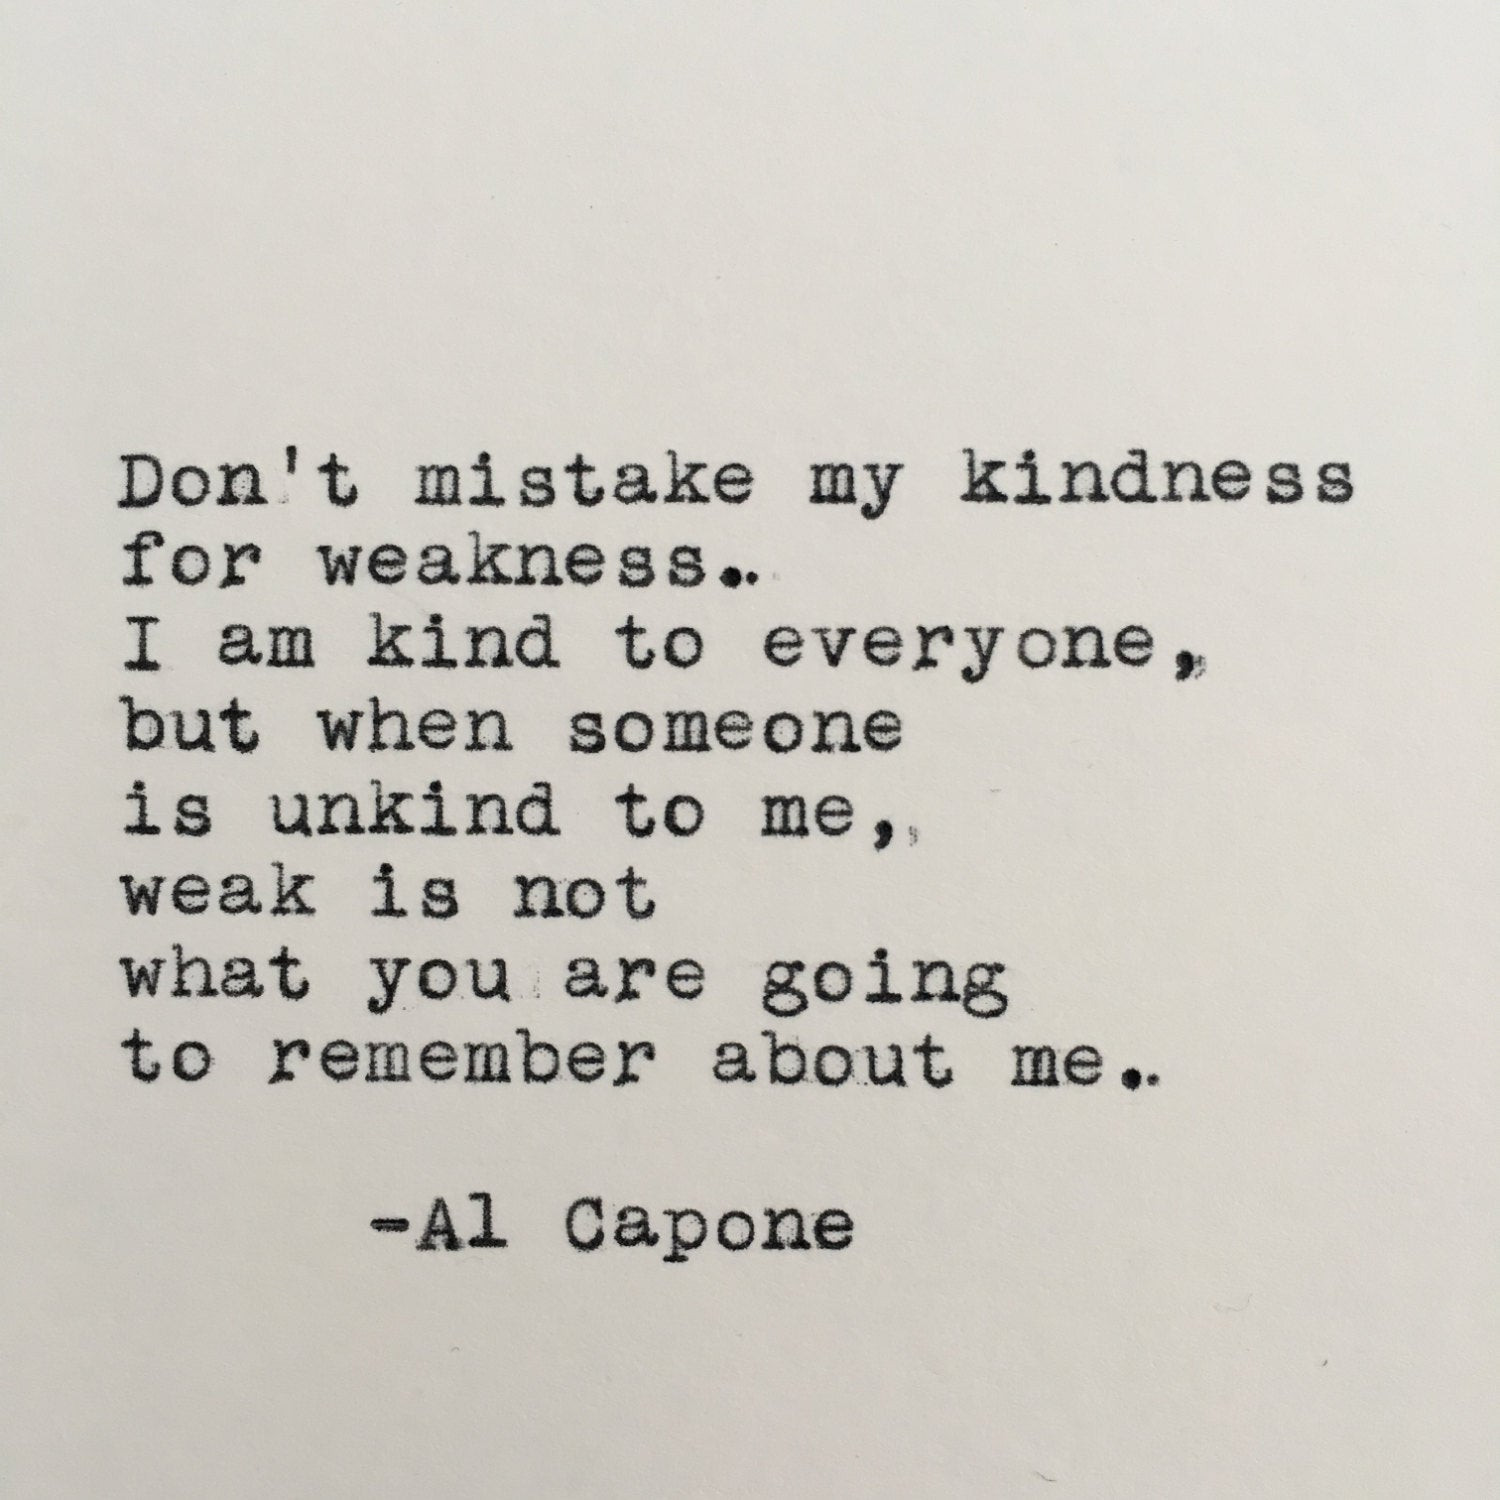 Al Capone Quotes Kindness
 Al Capone Kindness Quote Typed on Typewriter 4x6 White